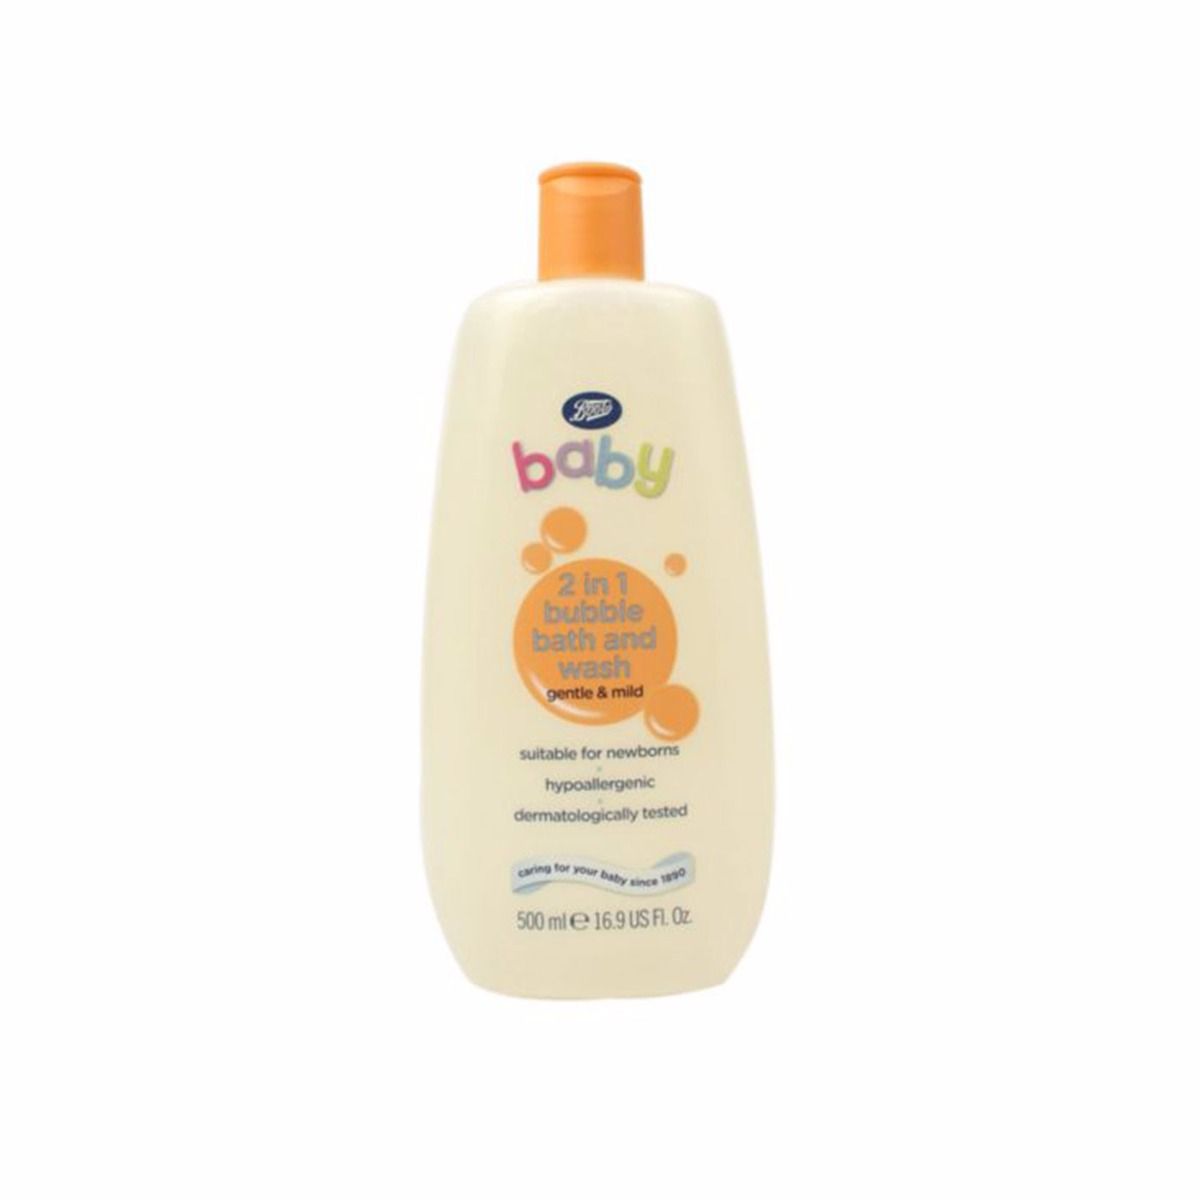 boots baby sunscreen